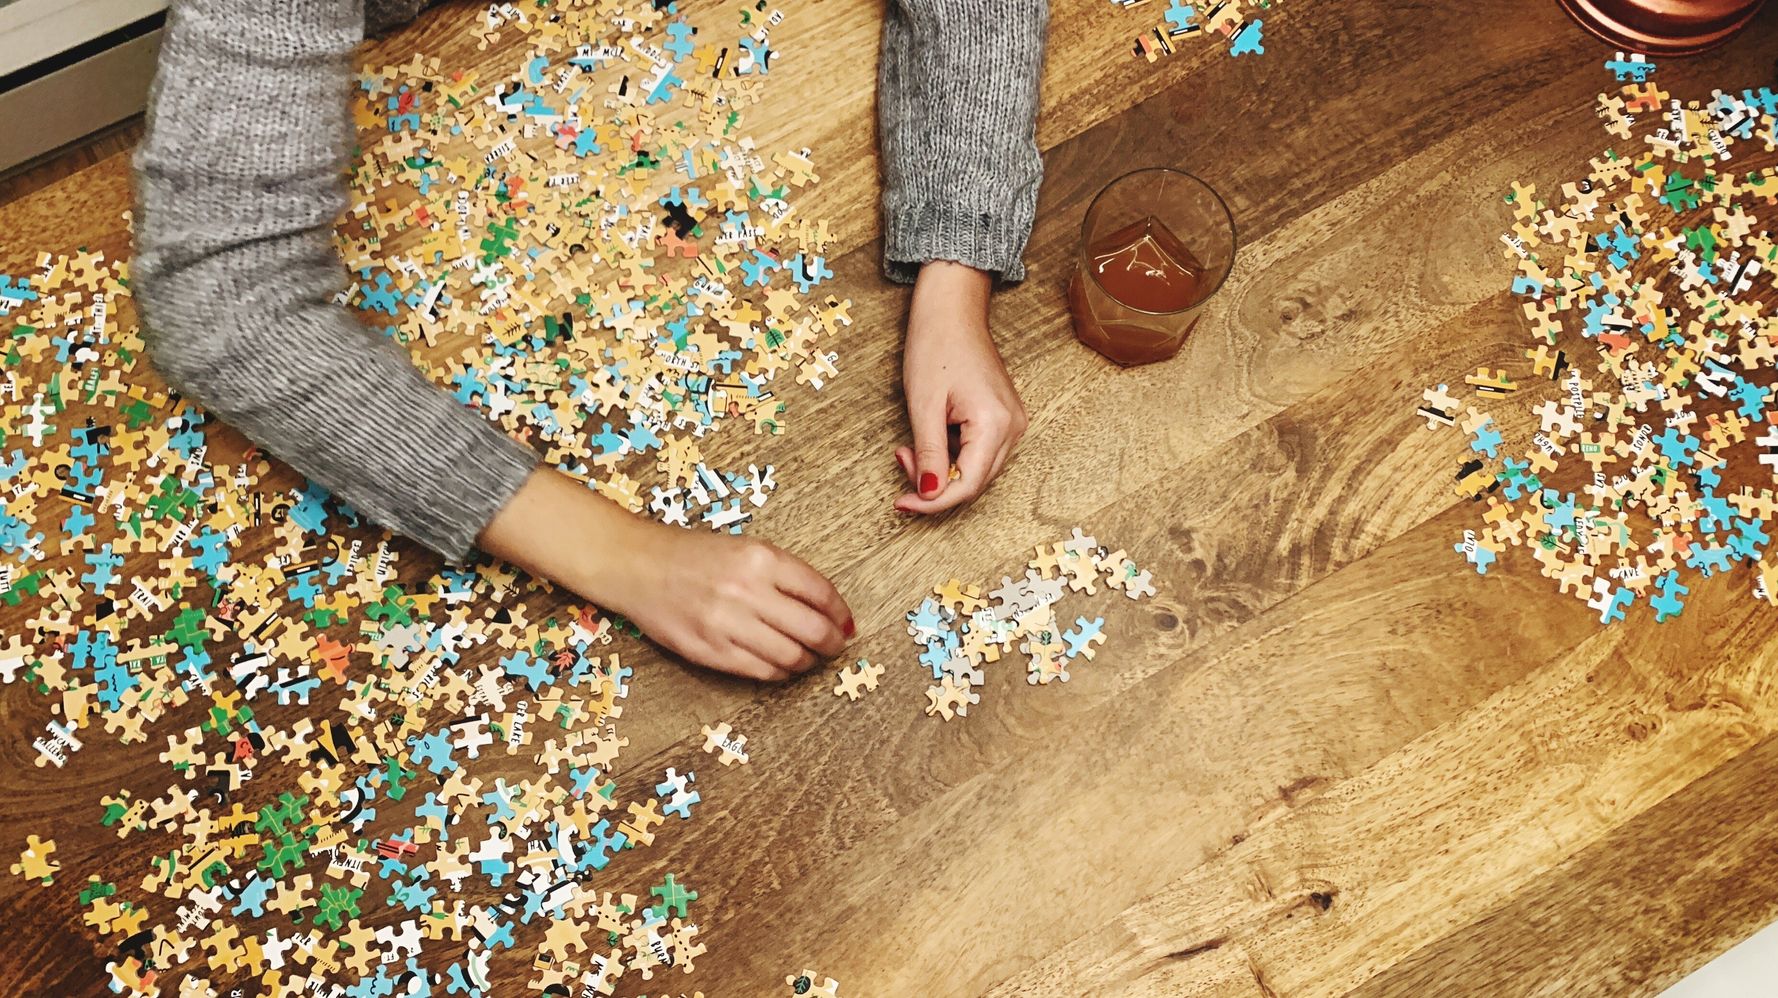 Why Jigsaw Puzzles Are So Soothing And Addicting Right Now - MSN Money